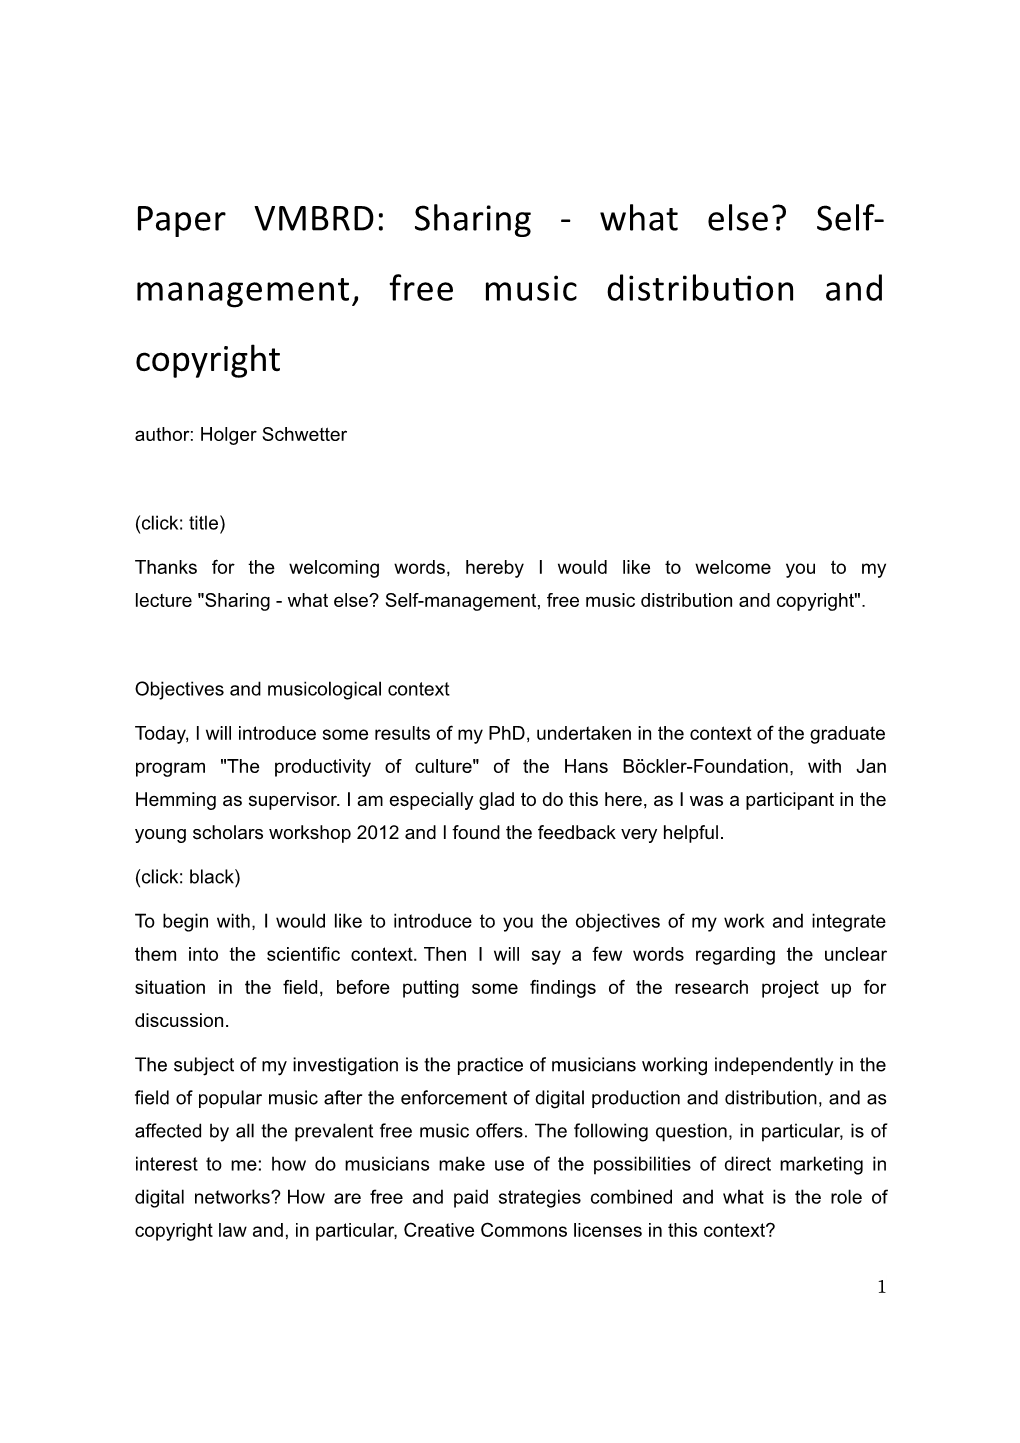 Paper VMBRD: Sharing - What Else? Self- Management, Free Music Distribu on and Copyright Author: Holger Schwetter